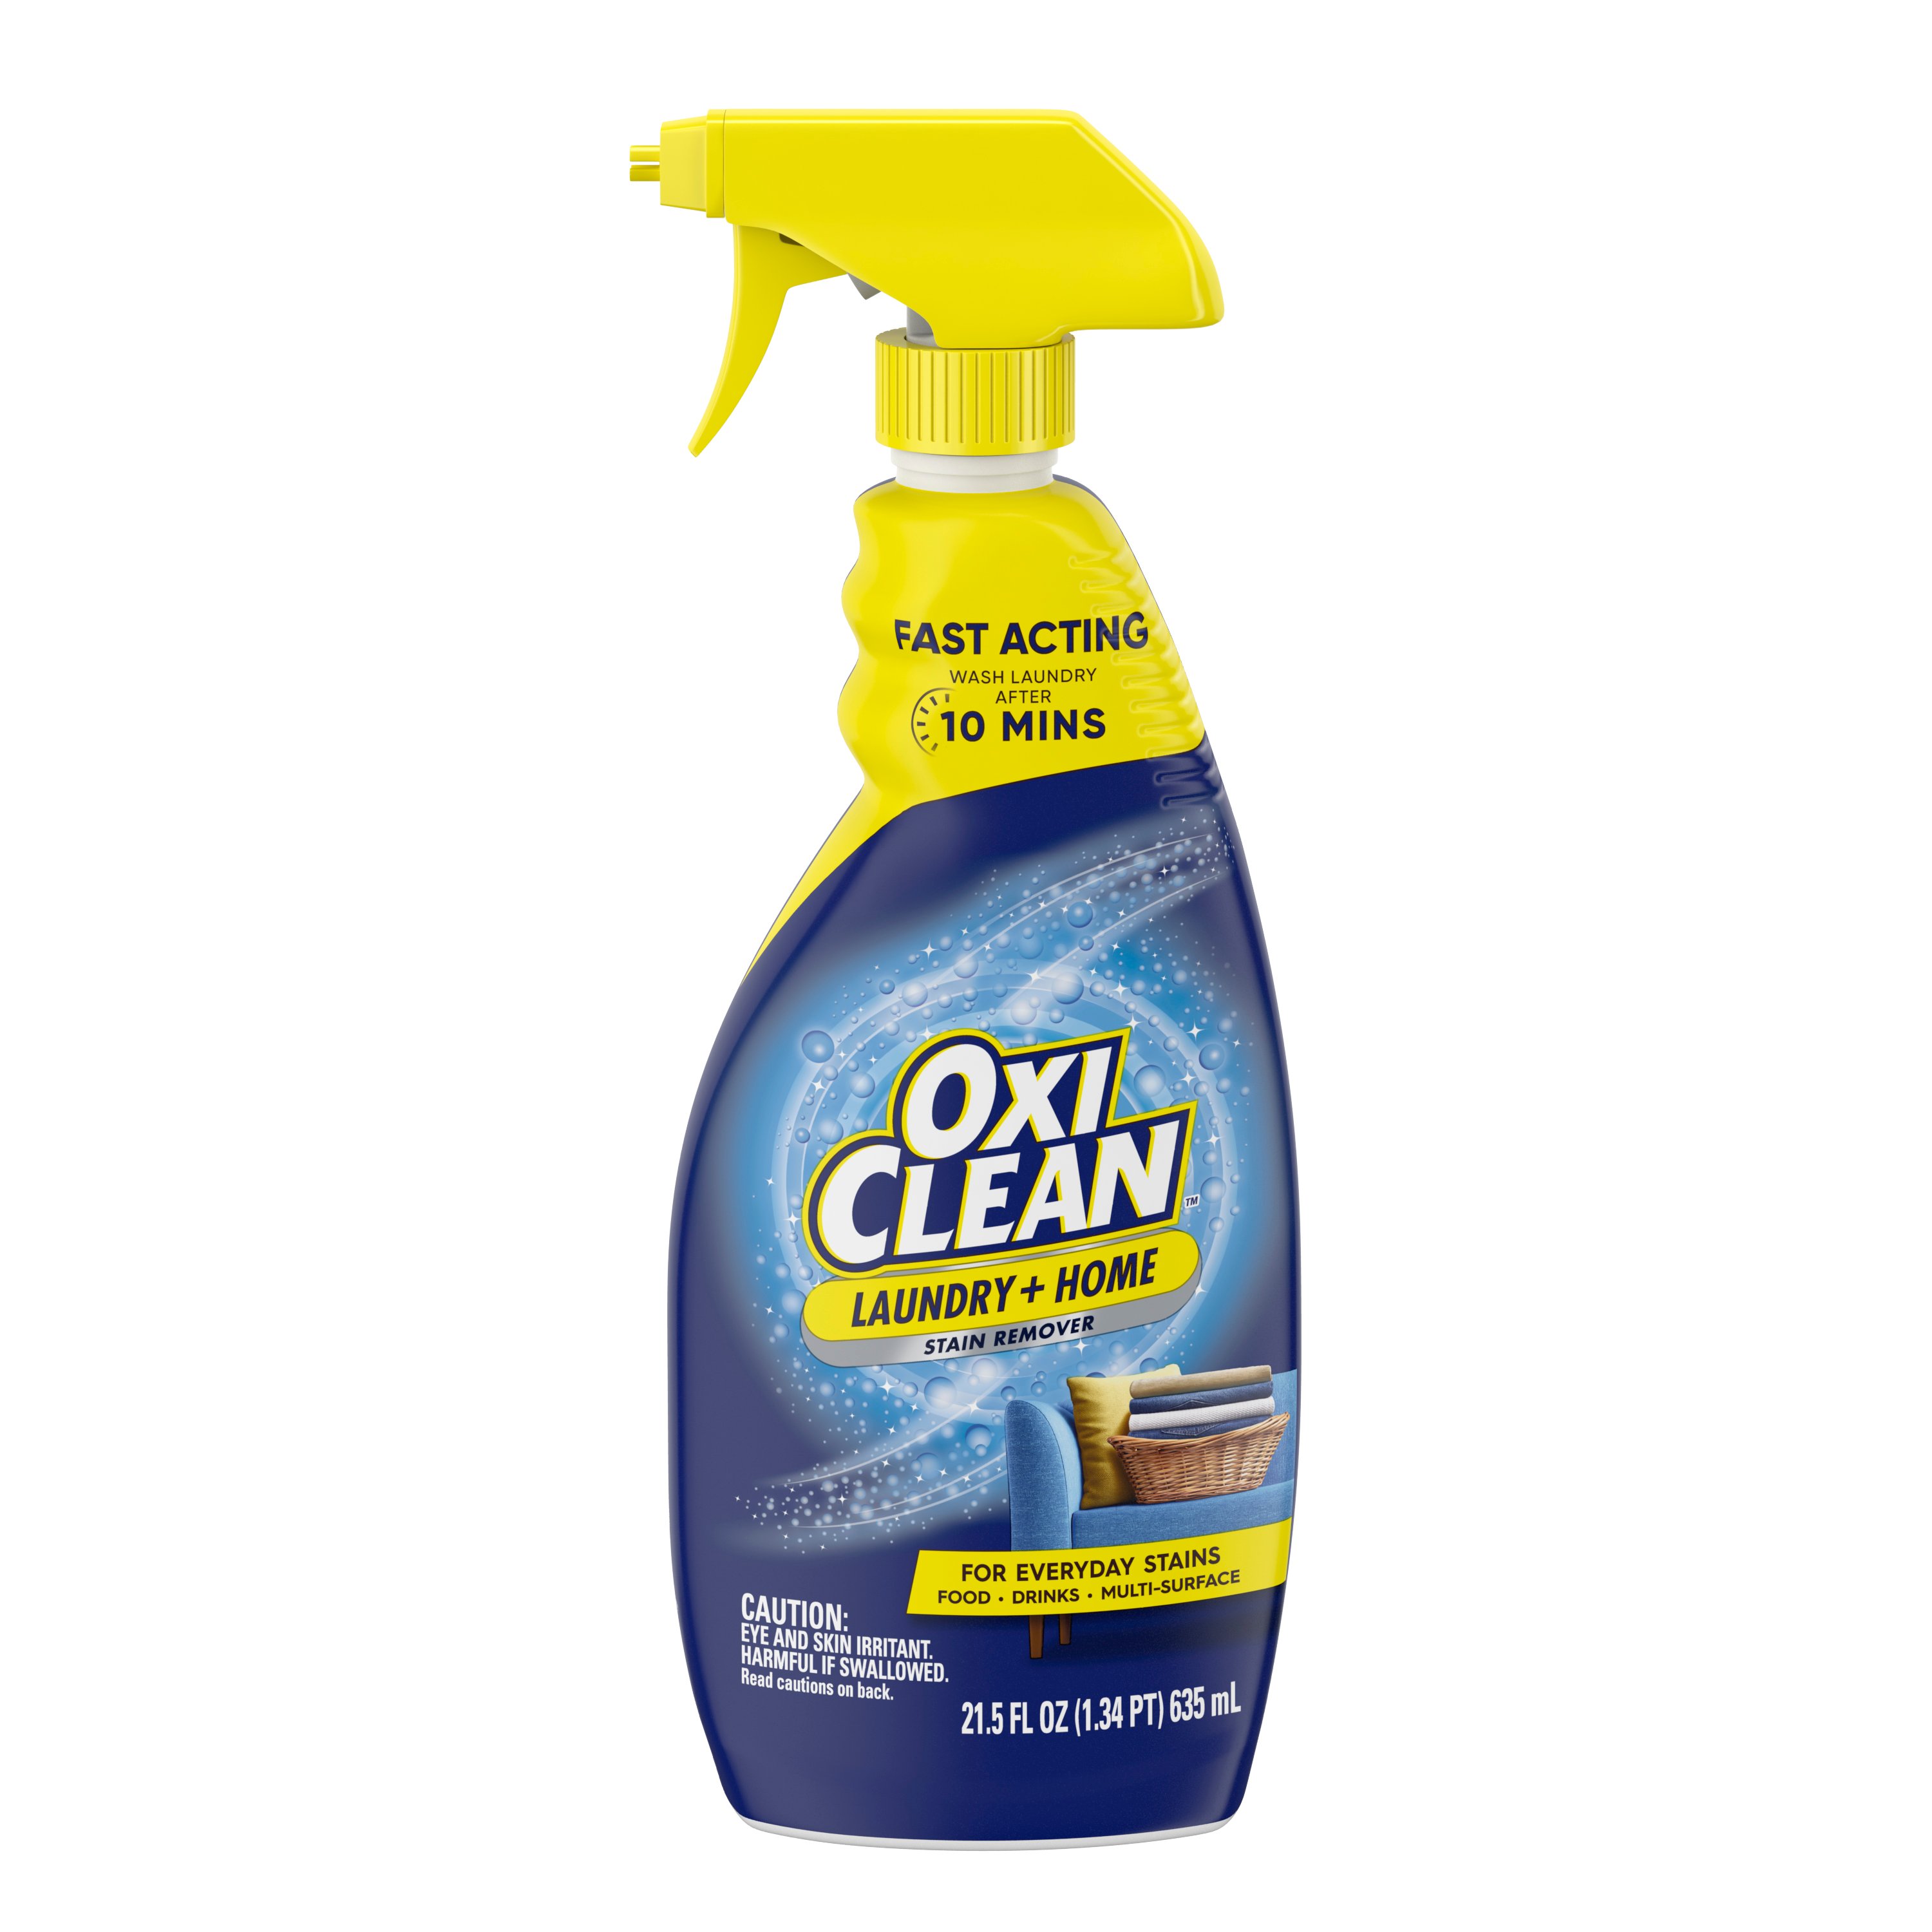 OxiClean Laundry Stain Remover - Shop Stain Removers at H-E-B